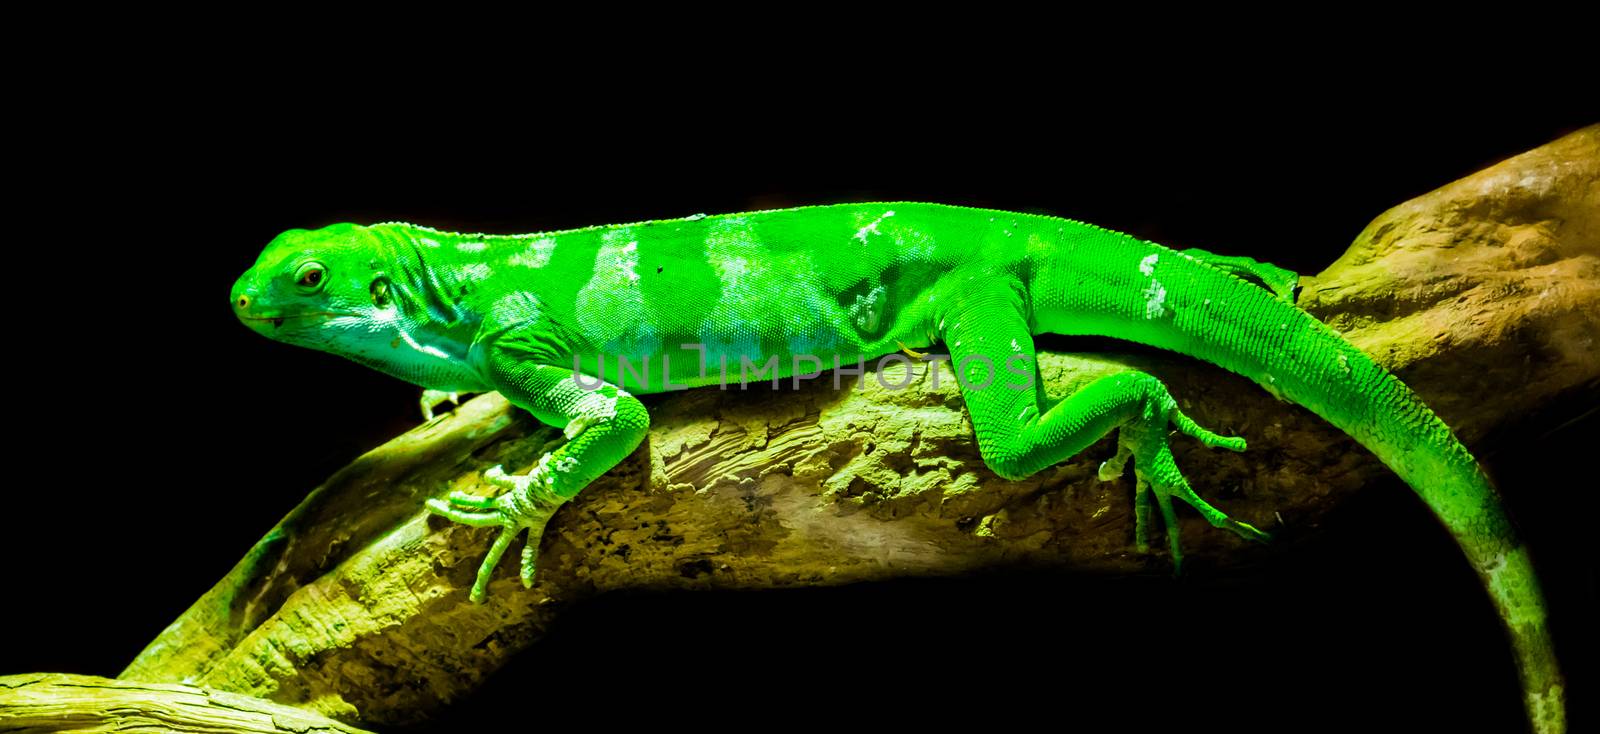 green Fiji banded iguana laying on a tree branch, endangered tropical lizard from the fijian islands, isolated on a black background by charlottebleijenberg